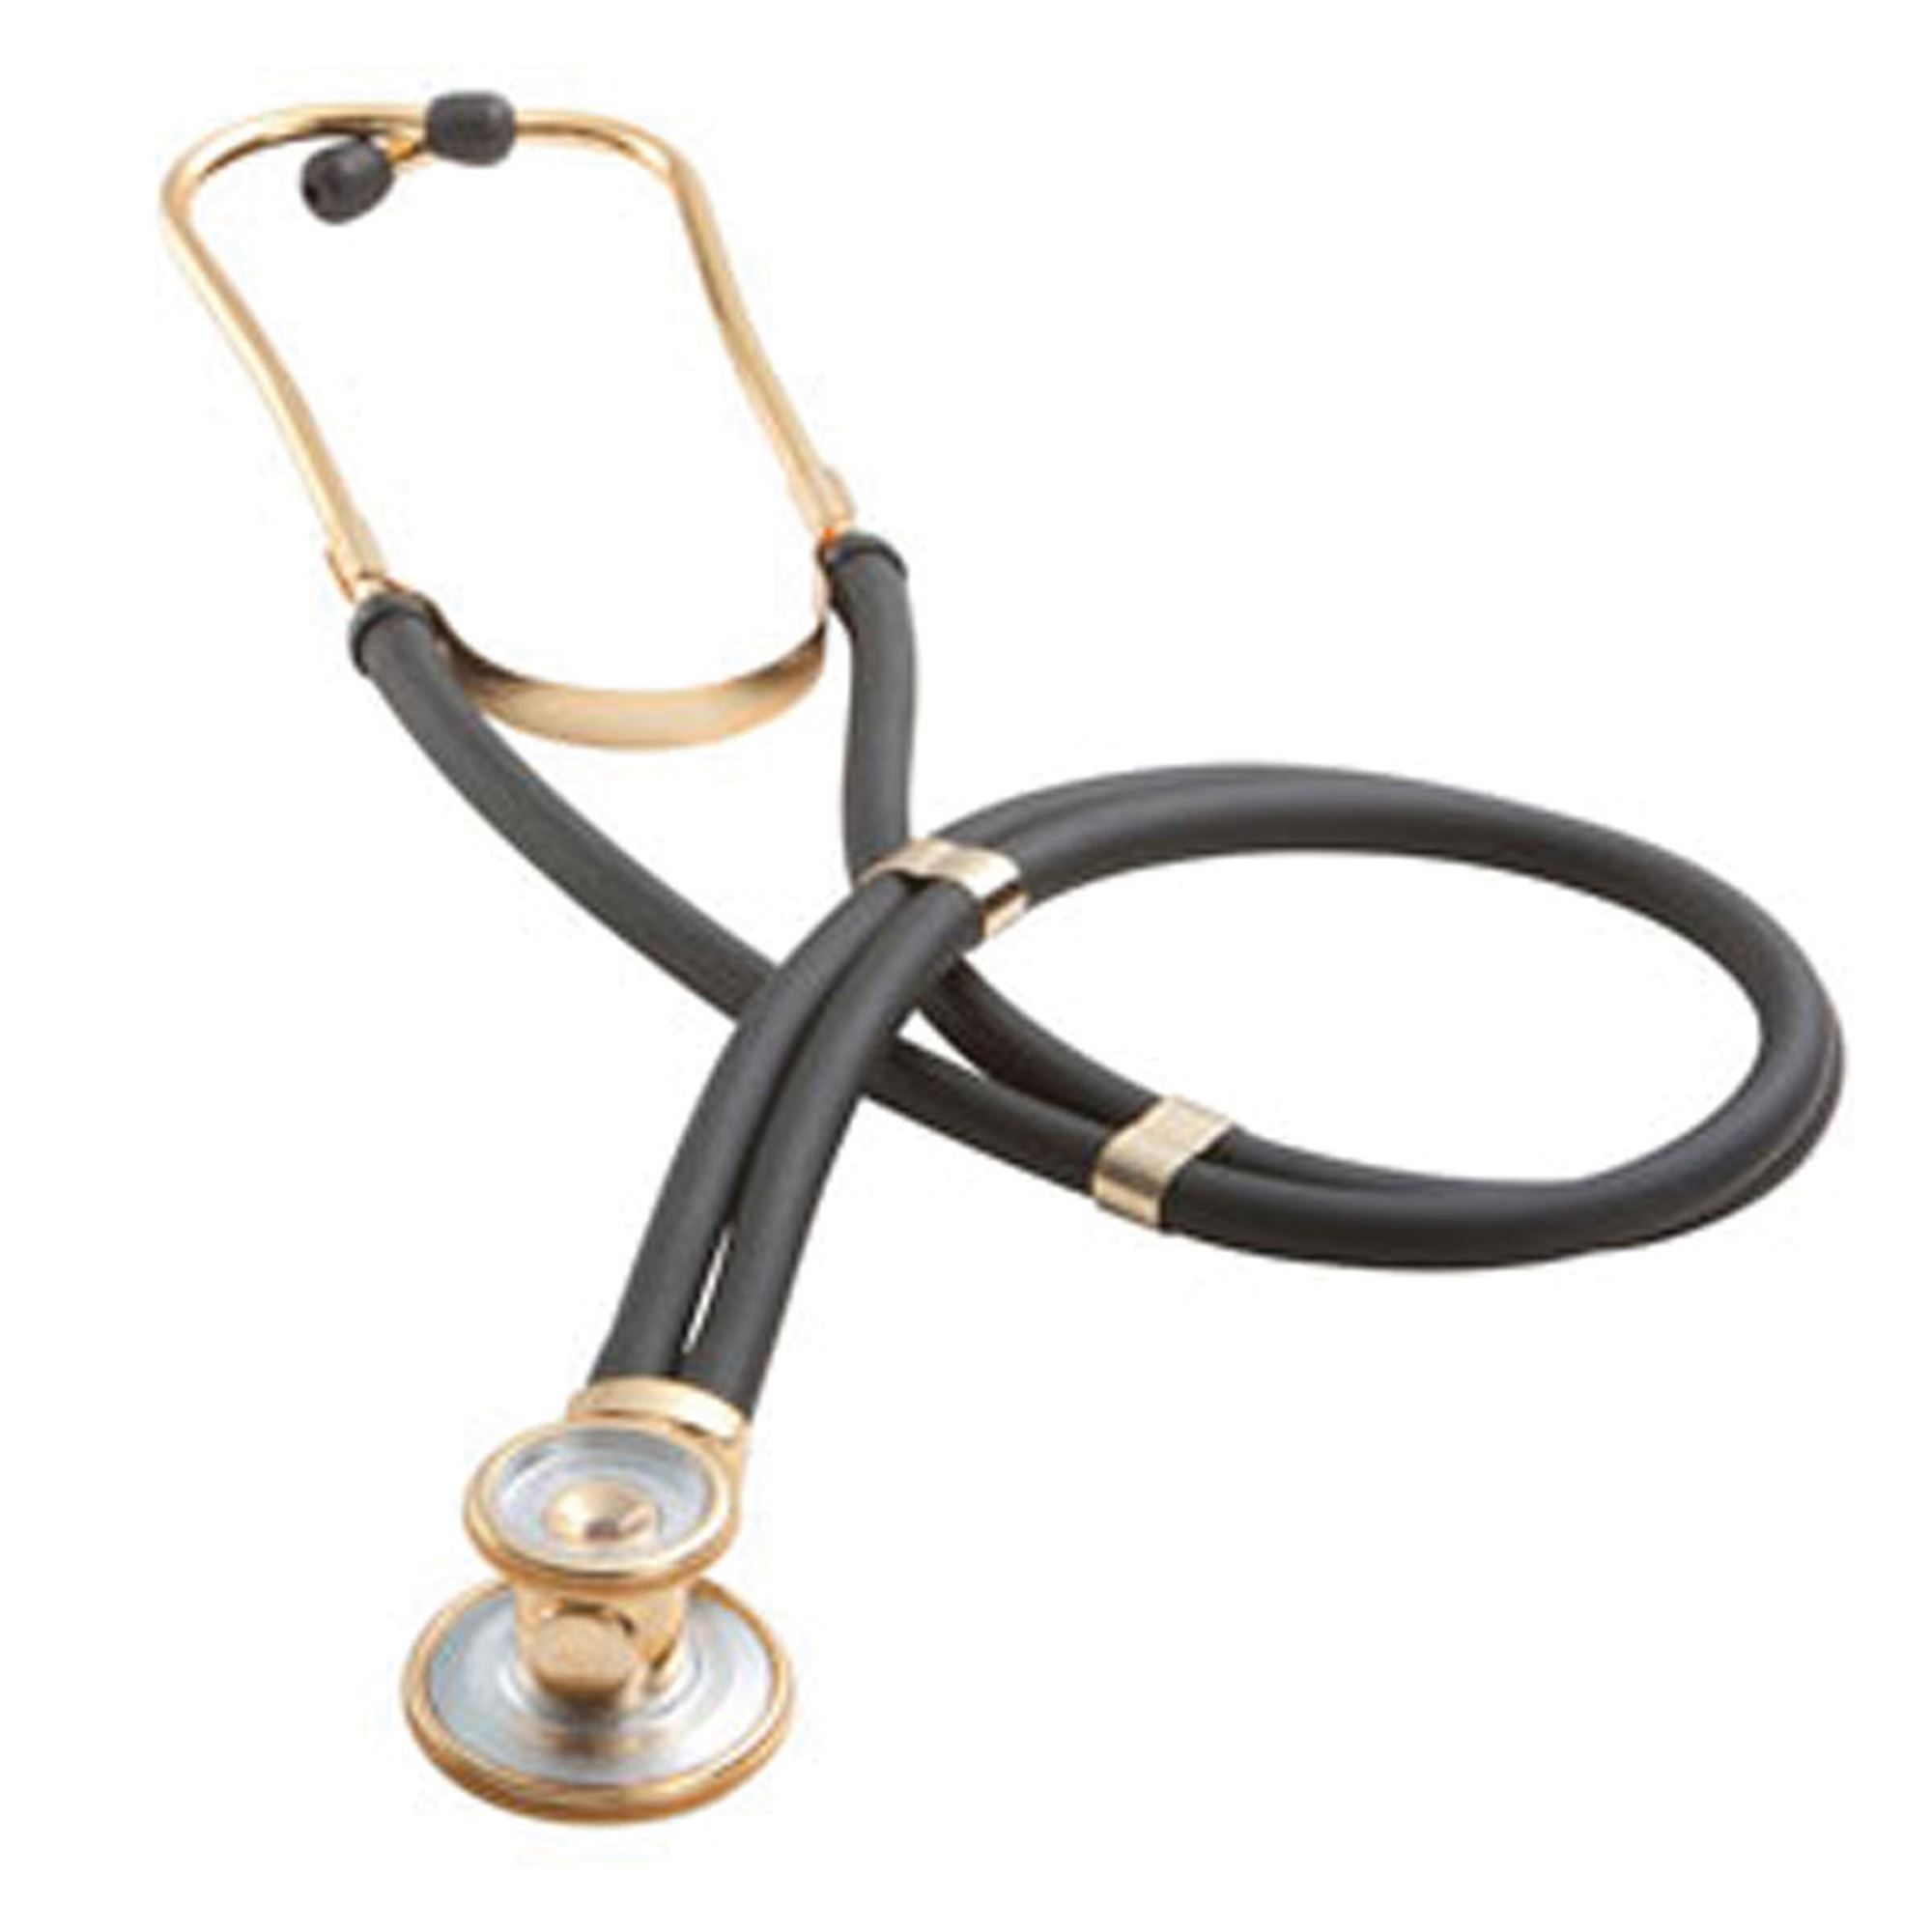 Gold Plated Stethoscope - Hopkins Medical Products